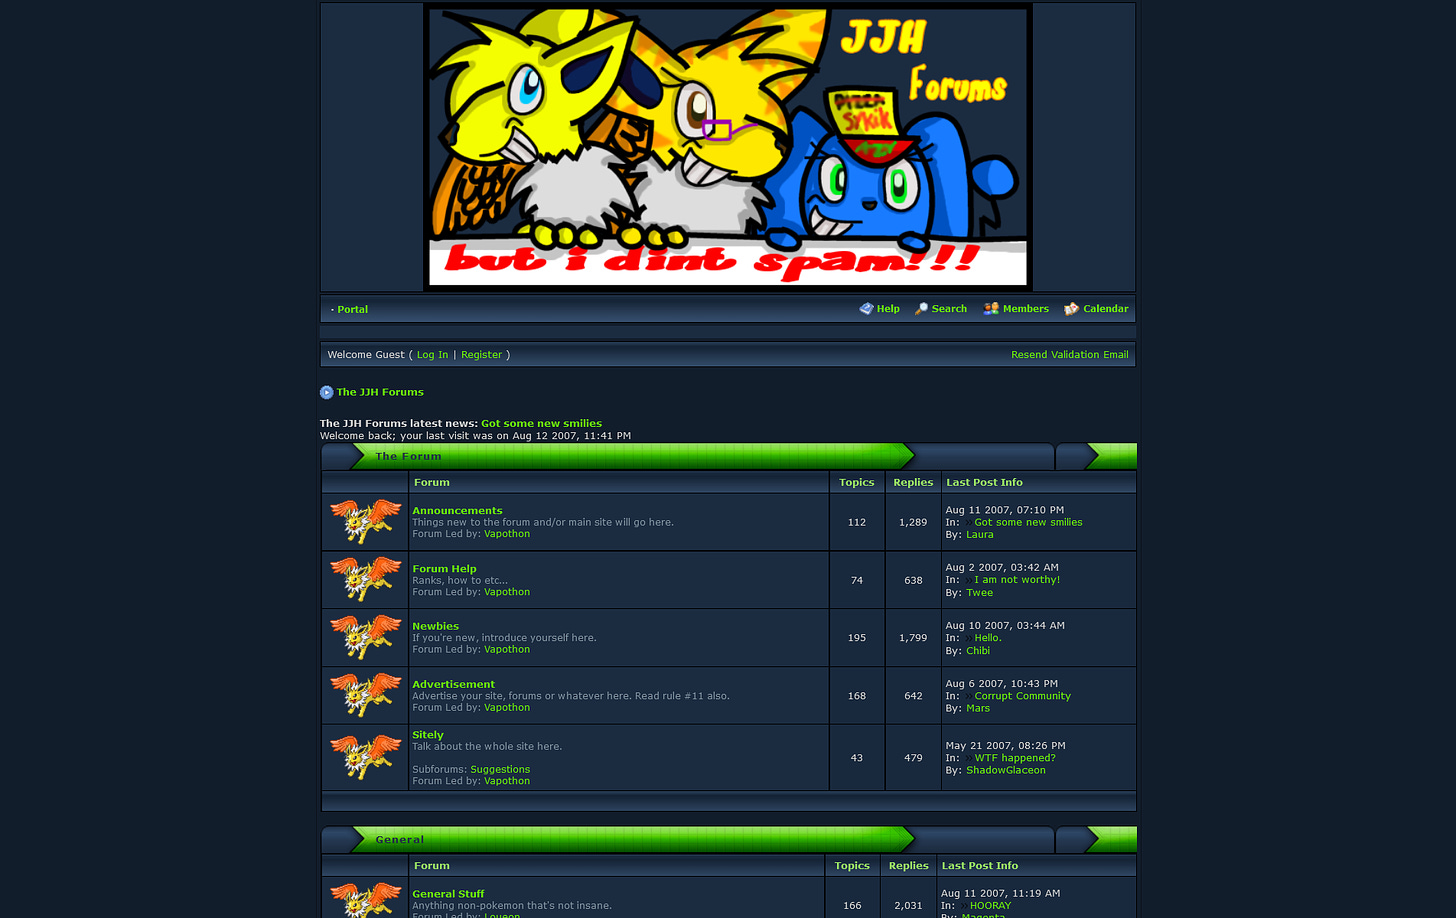 Joey & Jolty’s Home forums from September 2007